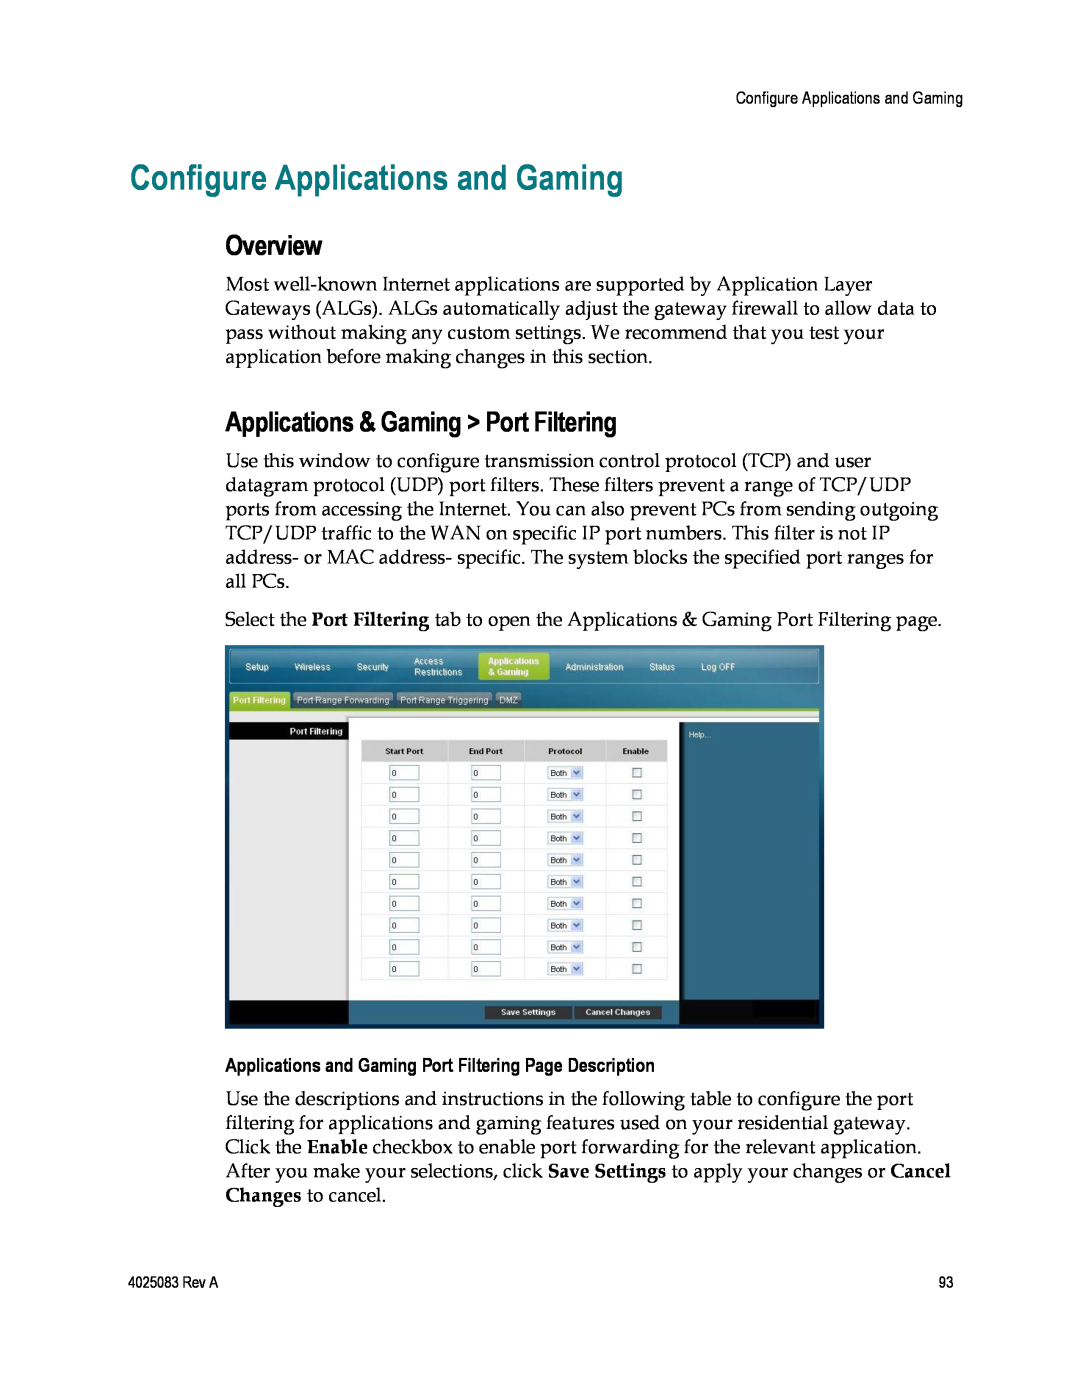 Cisco Systems EPC3827, DPC3827, 4039760 Configure Applications and Gaming, Overview, Applications & Gaming Port Filtering 